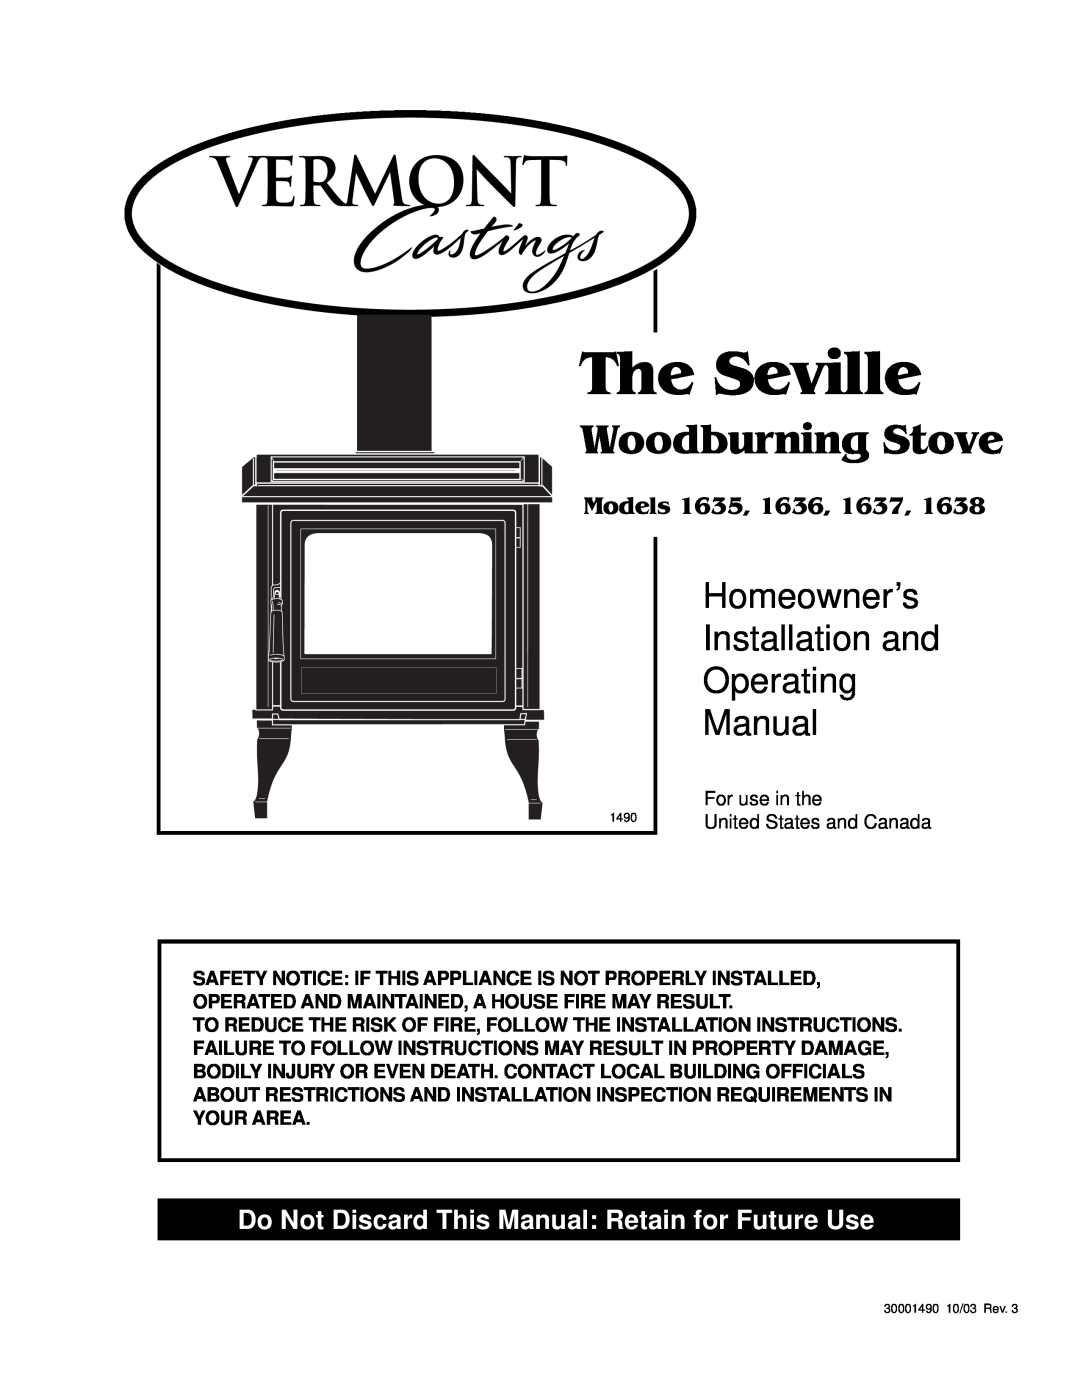 Vermont Casting 1638, 1635, 1637, 1636 installation instructions The Seville, Woodburning Stove, Models 